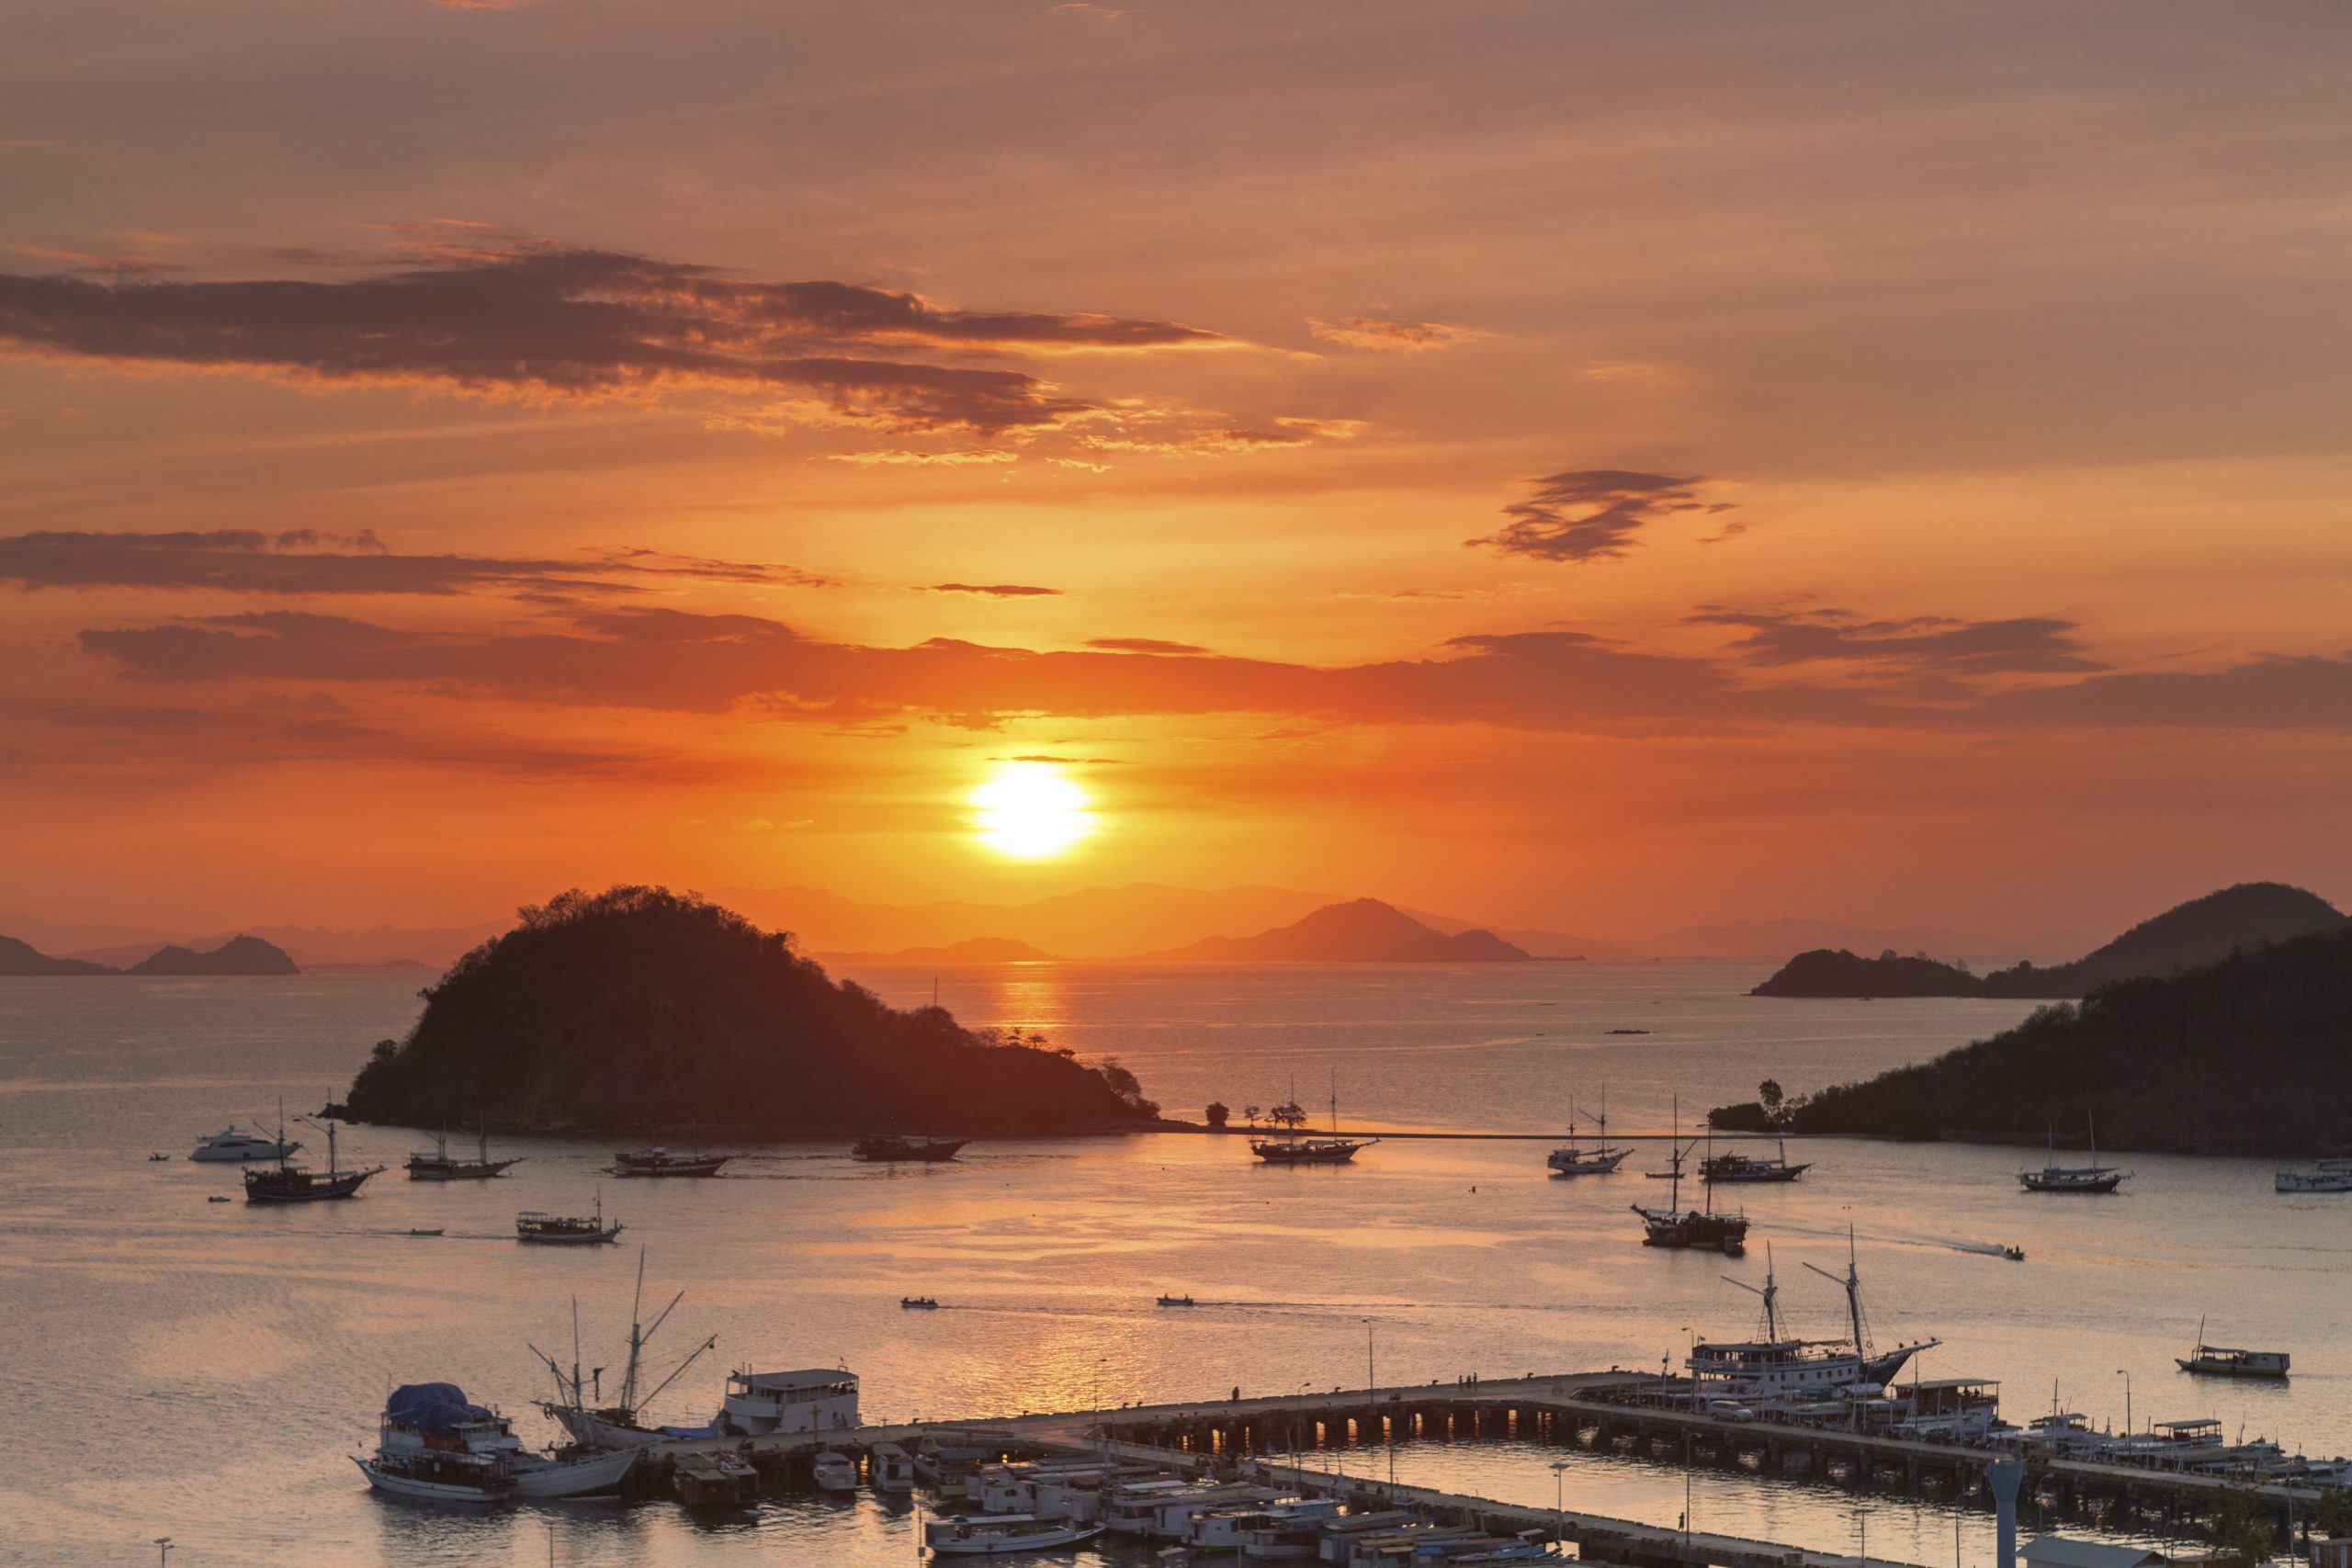 For Tourist Holidays in Labuan Bajo, You Must Stop by These 5 Cool Destinations